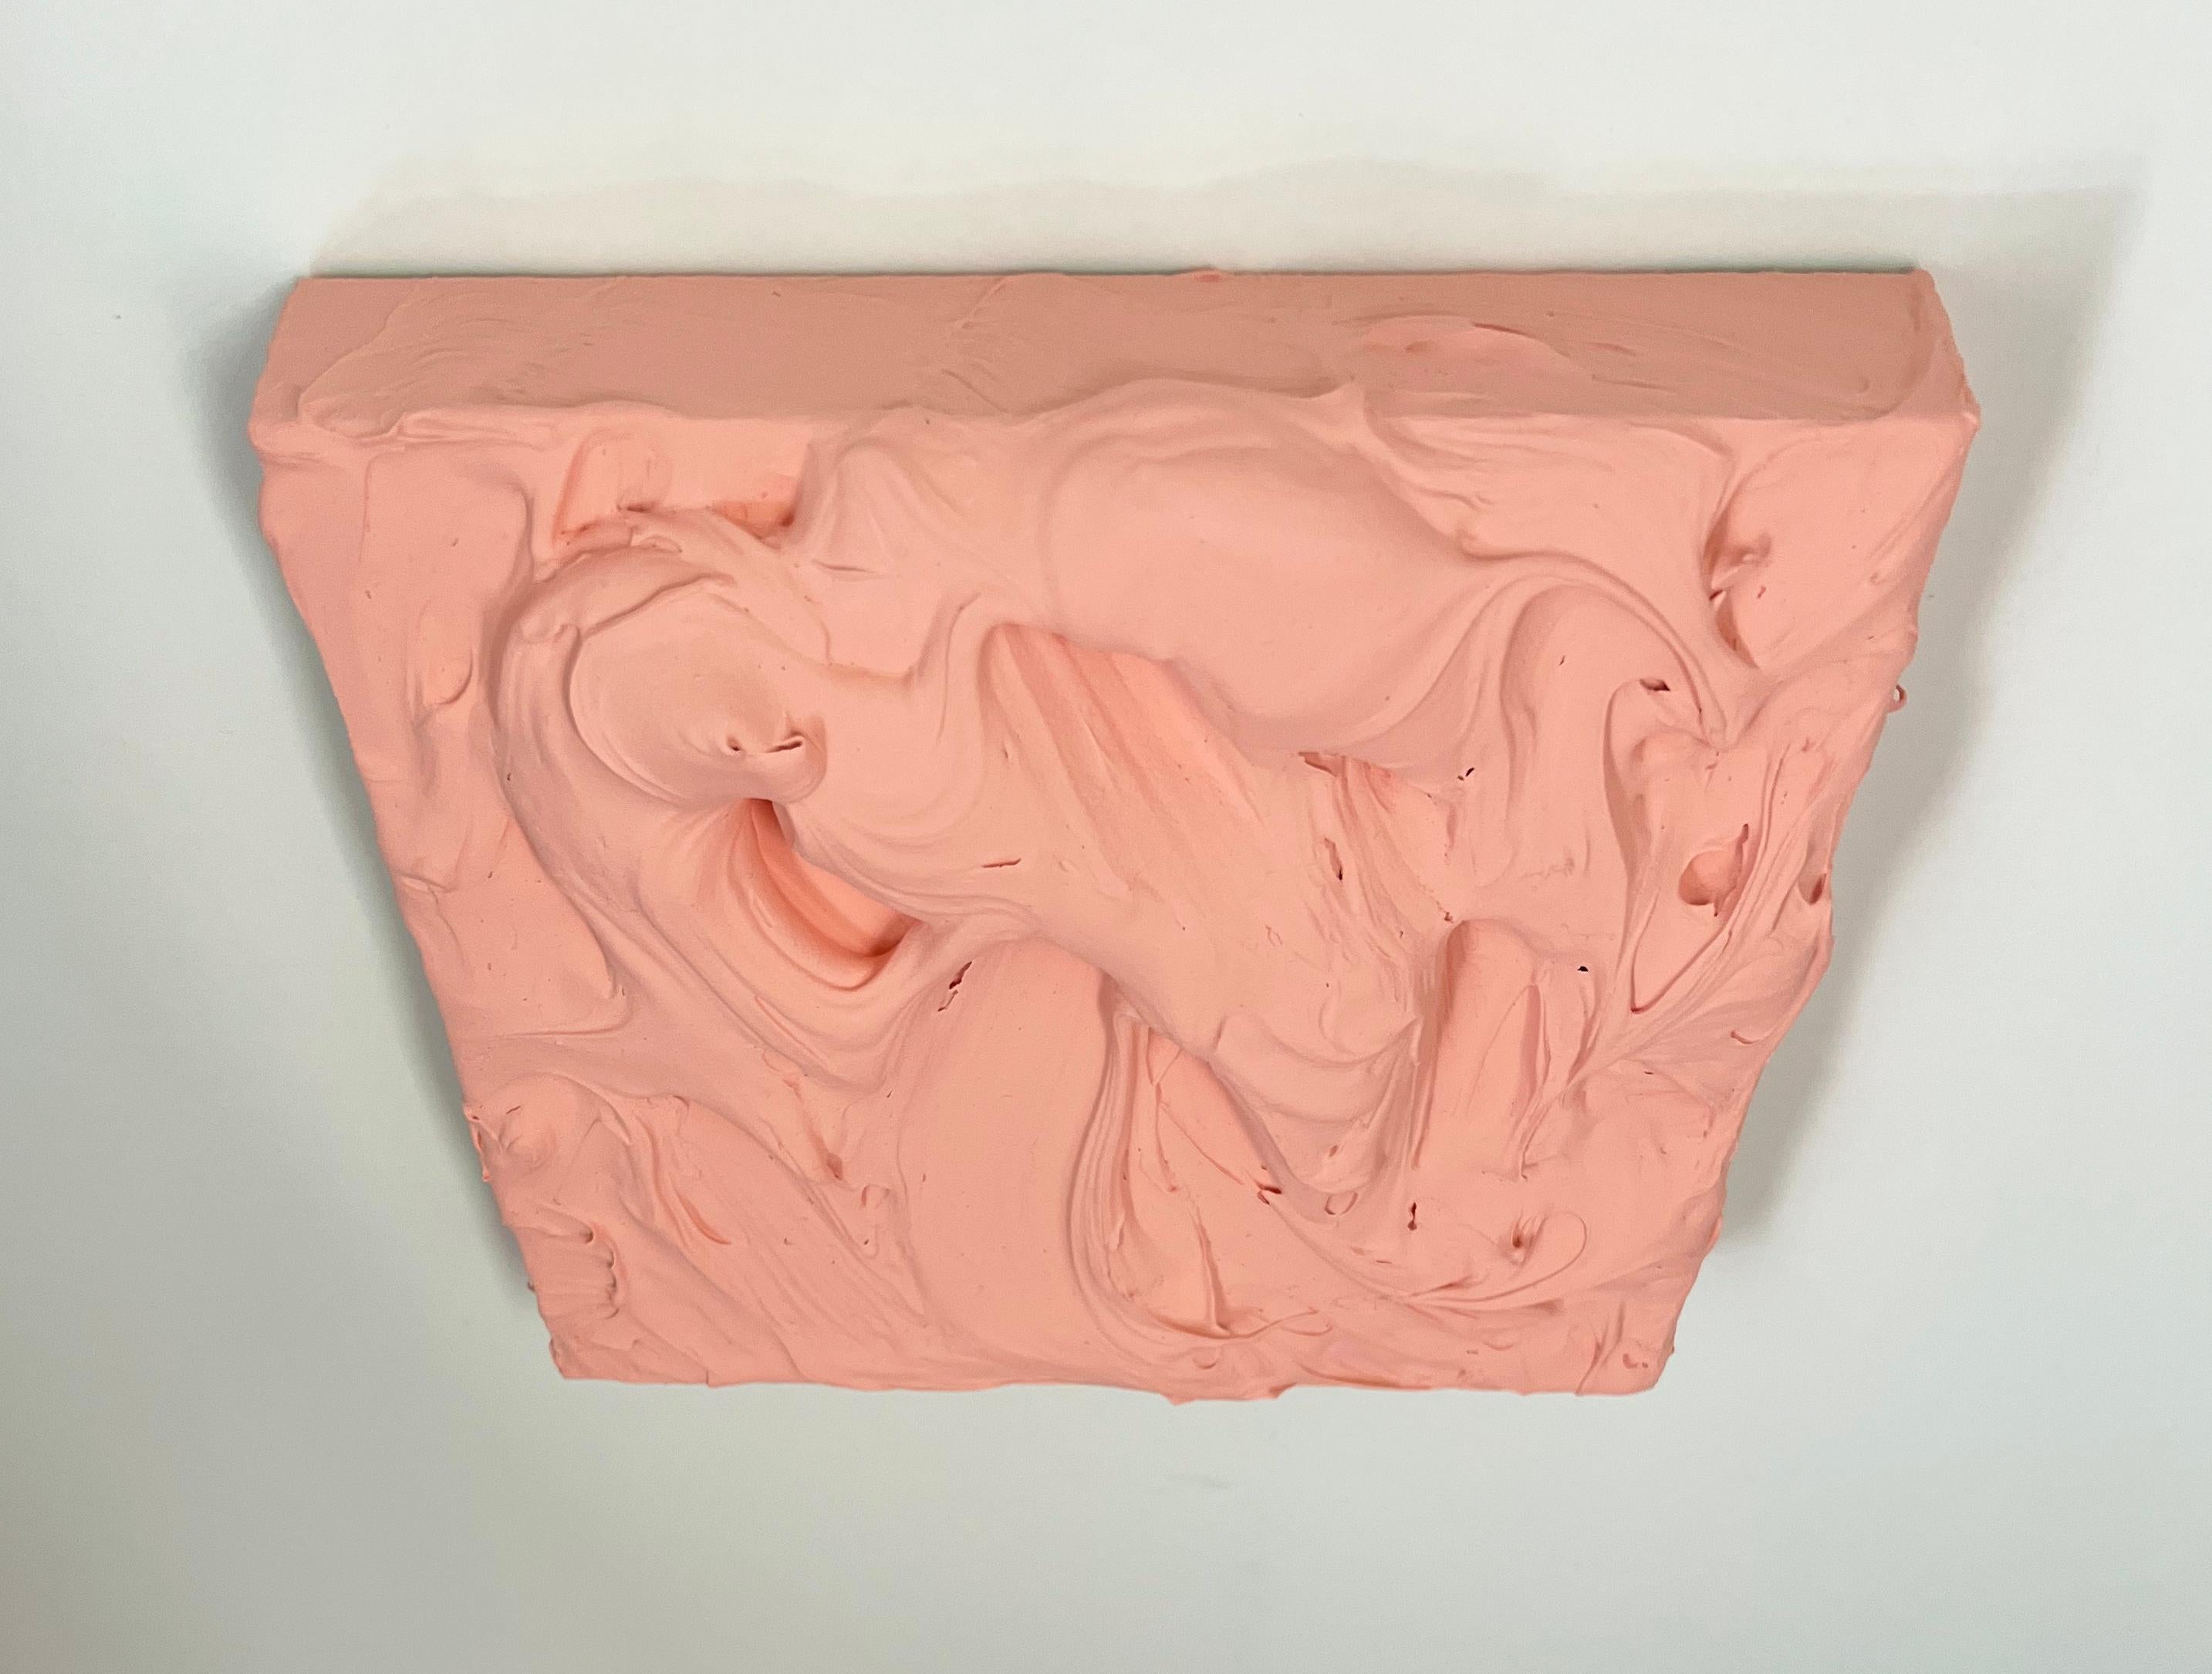 Flesh Excess (rose pink impasto thick painting monochrome pop art square design) - Sculpture by Chloe Hedden